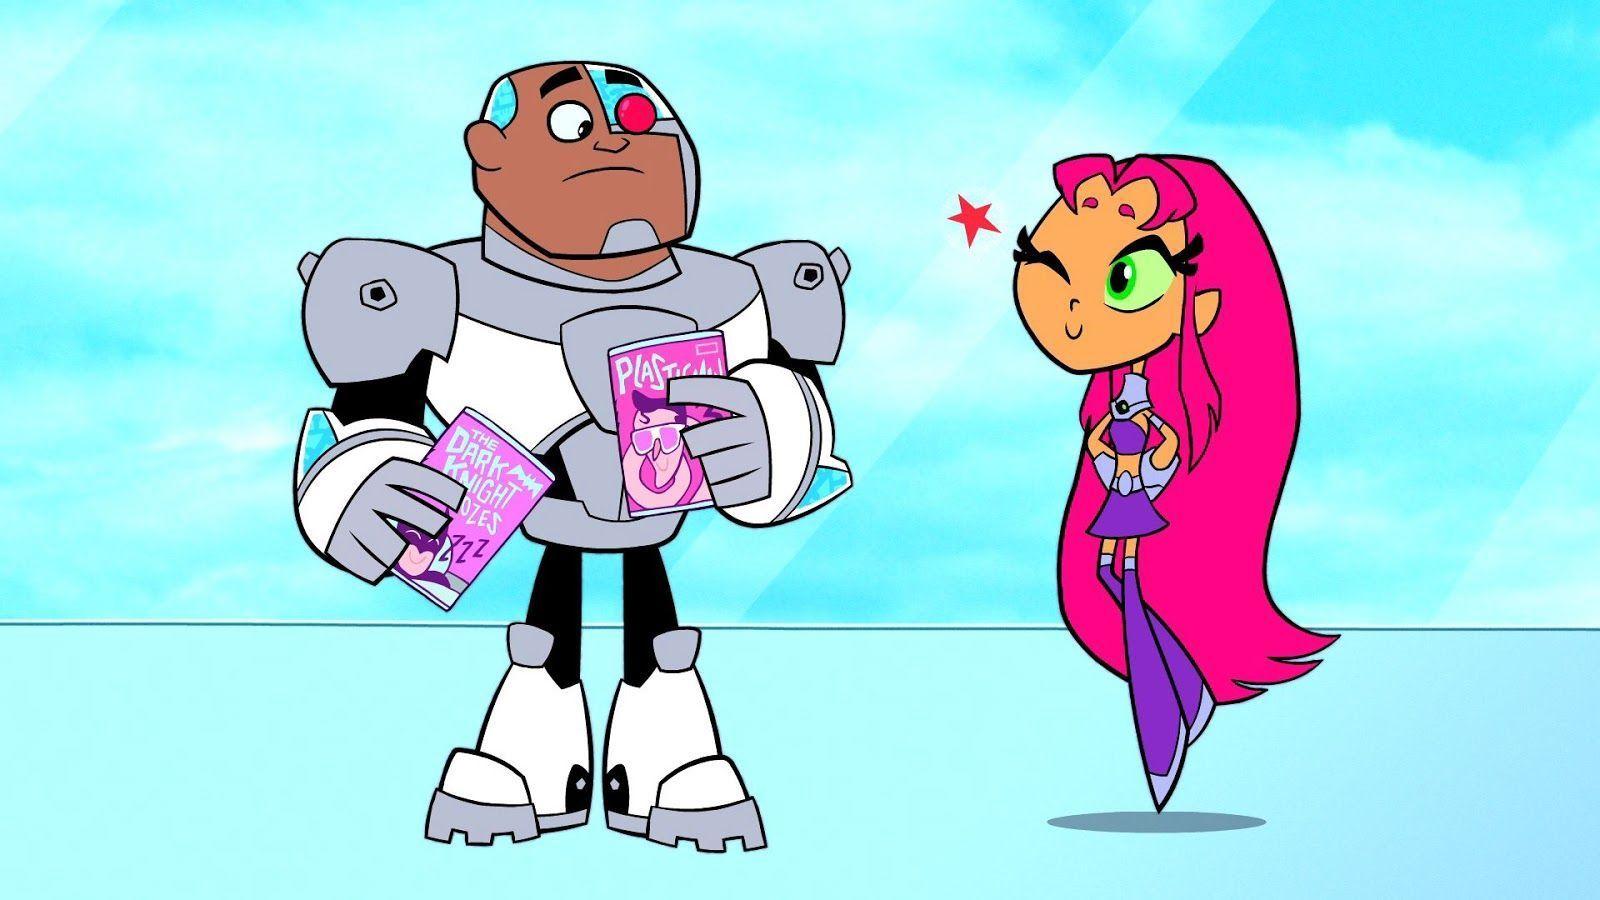 Clips and image from Beware the Batman and Teen Titans Go